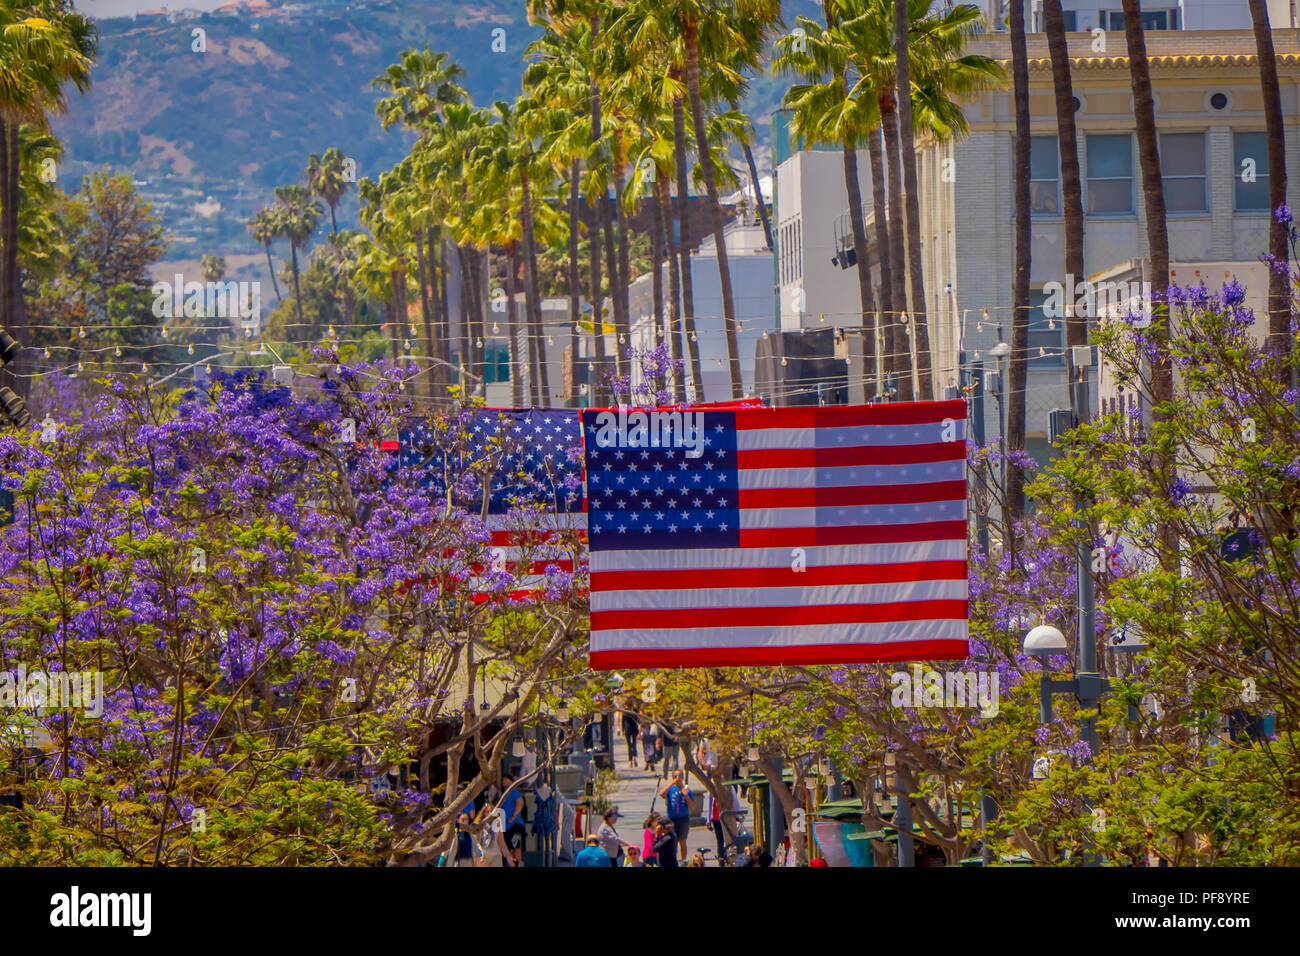 2 - Angeles Usa 3rd June Resolution Stock Photography and Images - Alamy